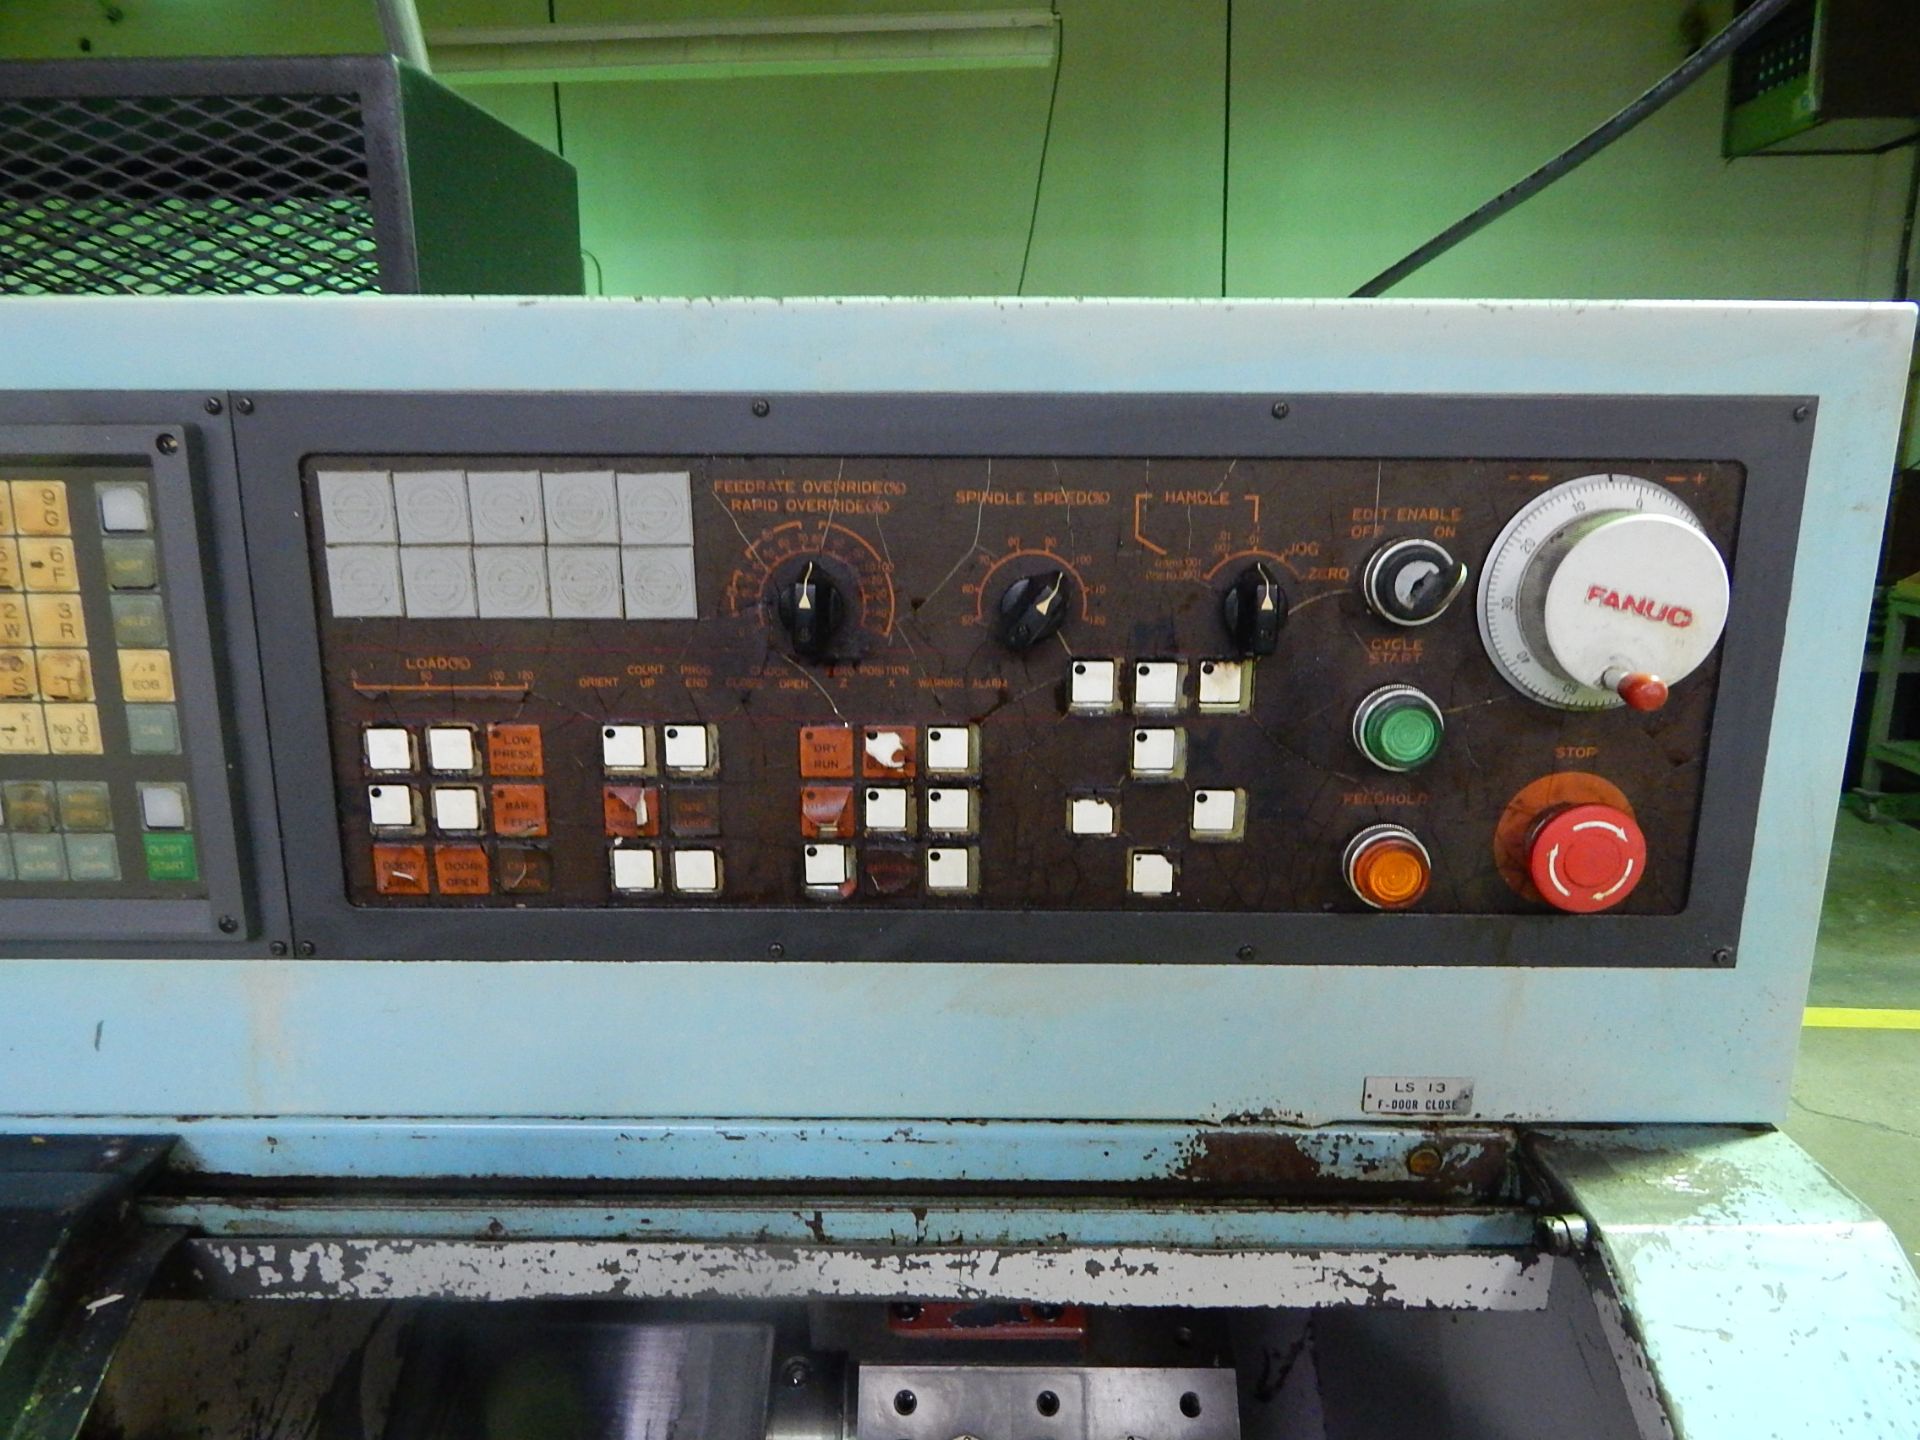 Warner & Swasey Model WSC-6 CNC Turning Center, s/n 1488326, Fanuc 0-T CNC Control, 1.85 In. - Image 5 of 8